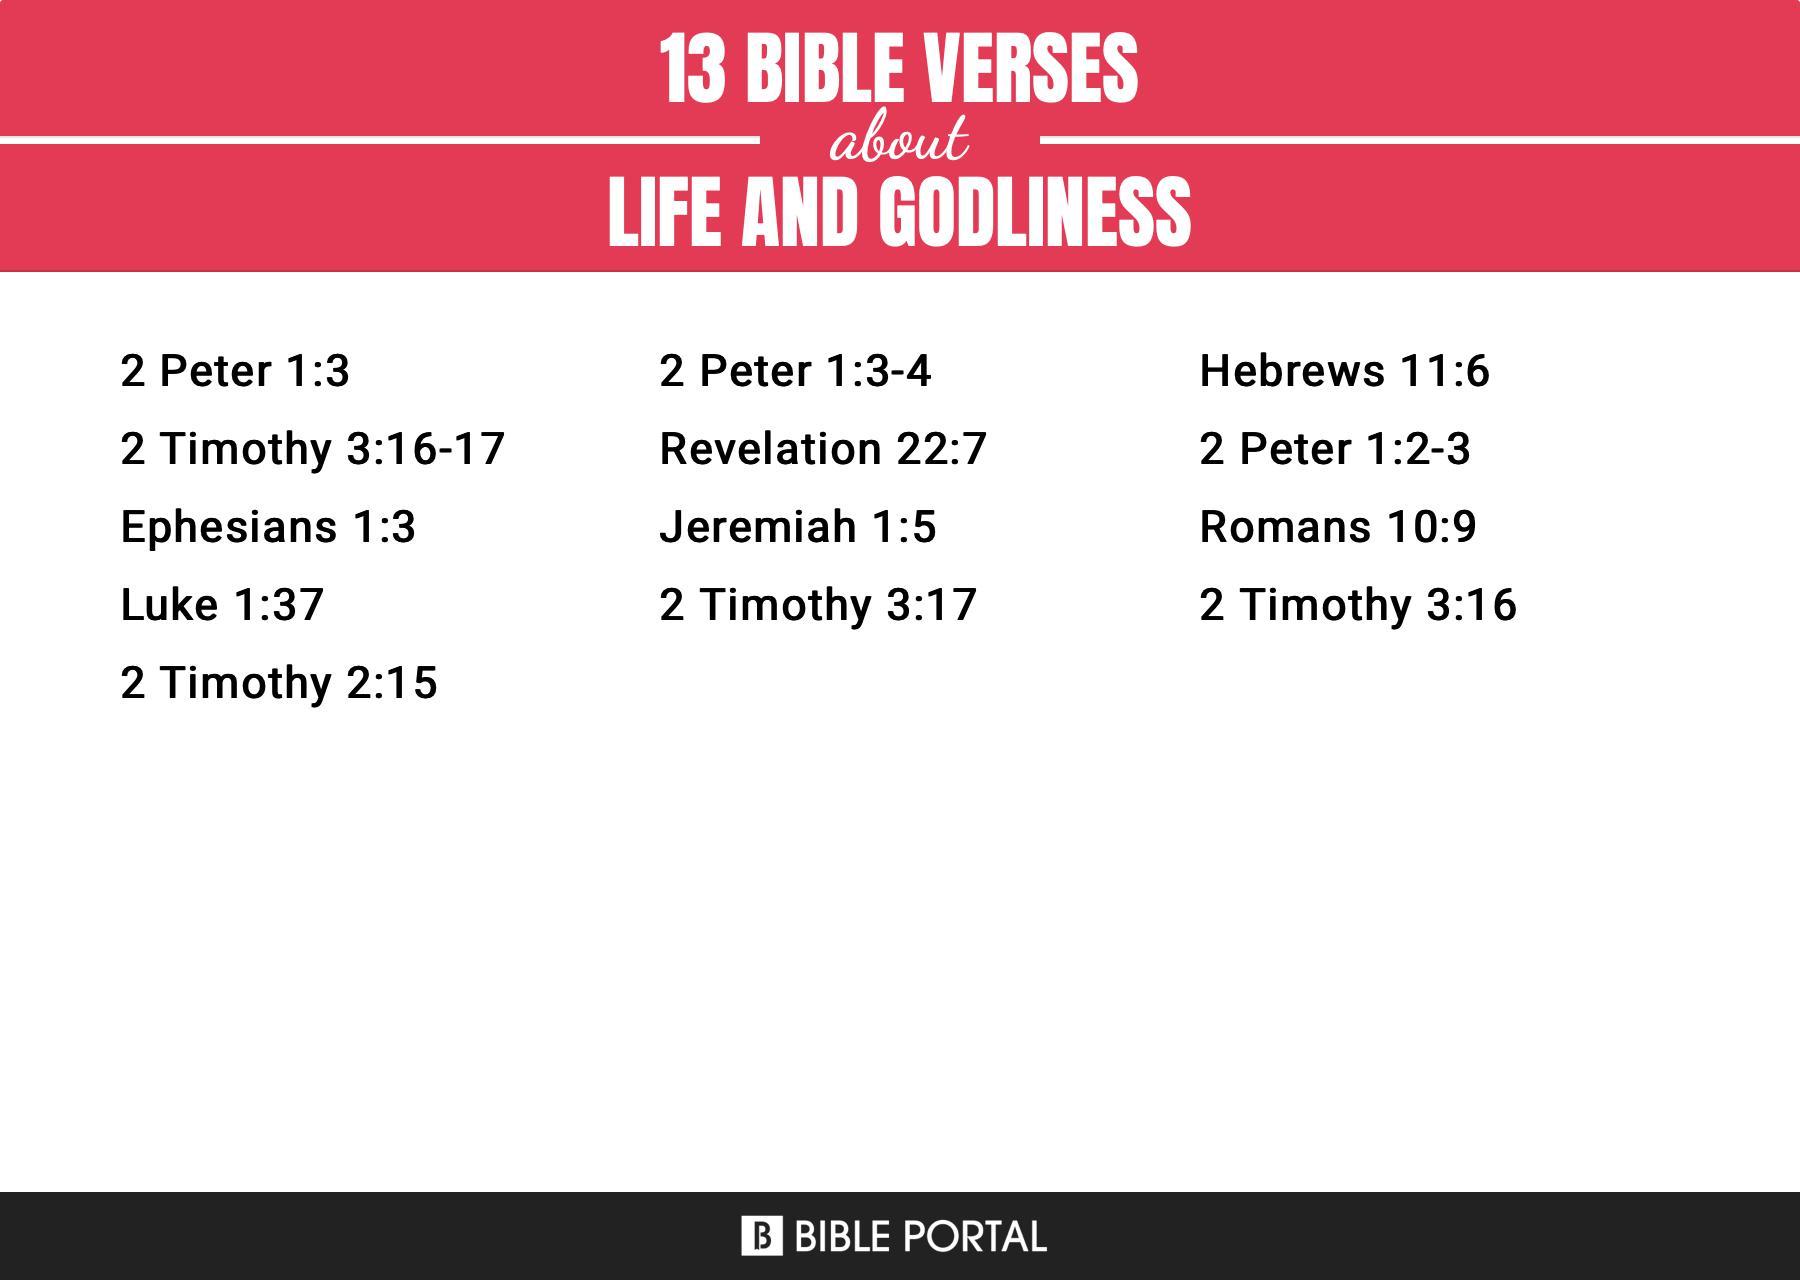 What Does the Bible Say about Life And Godliness?